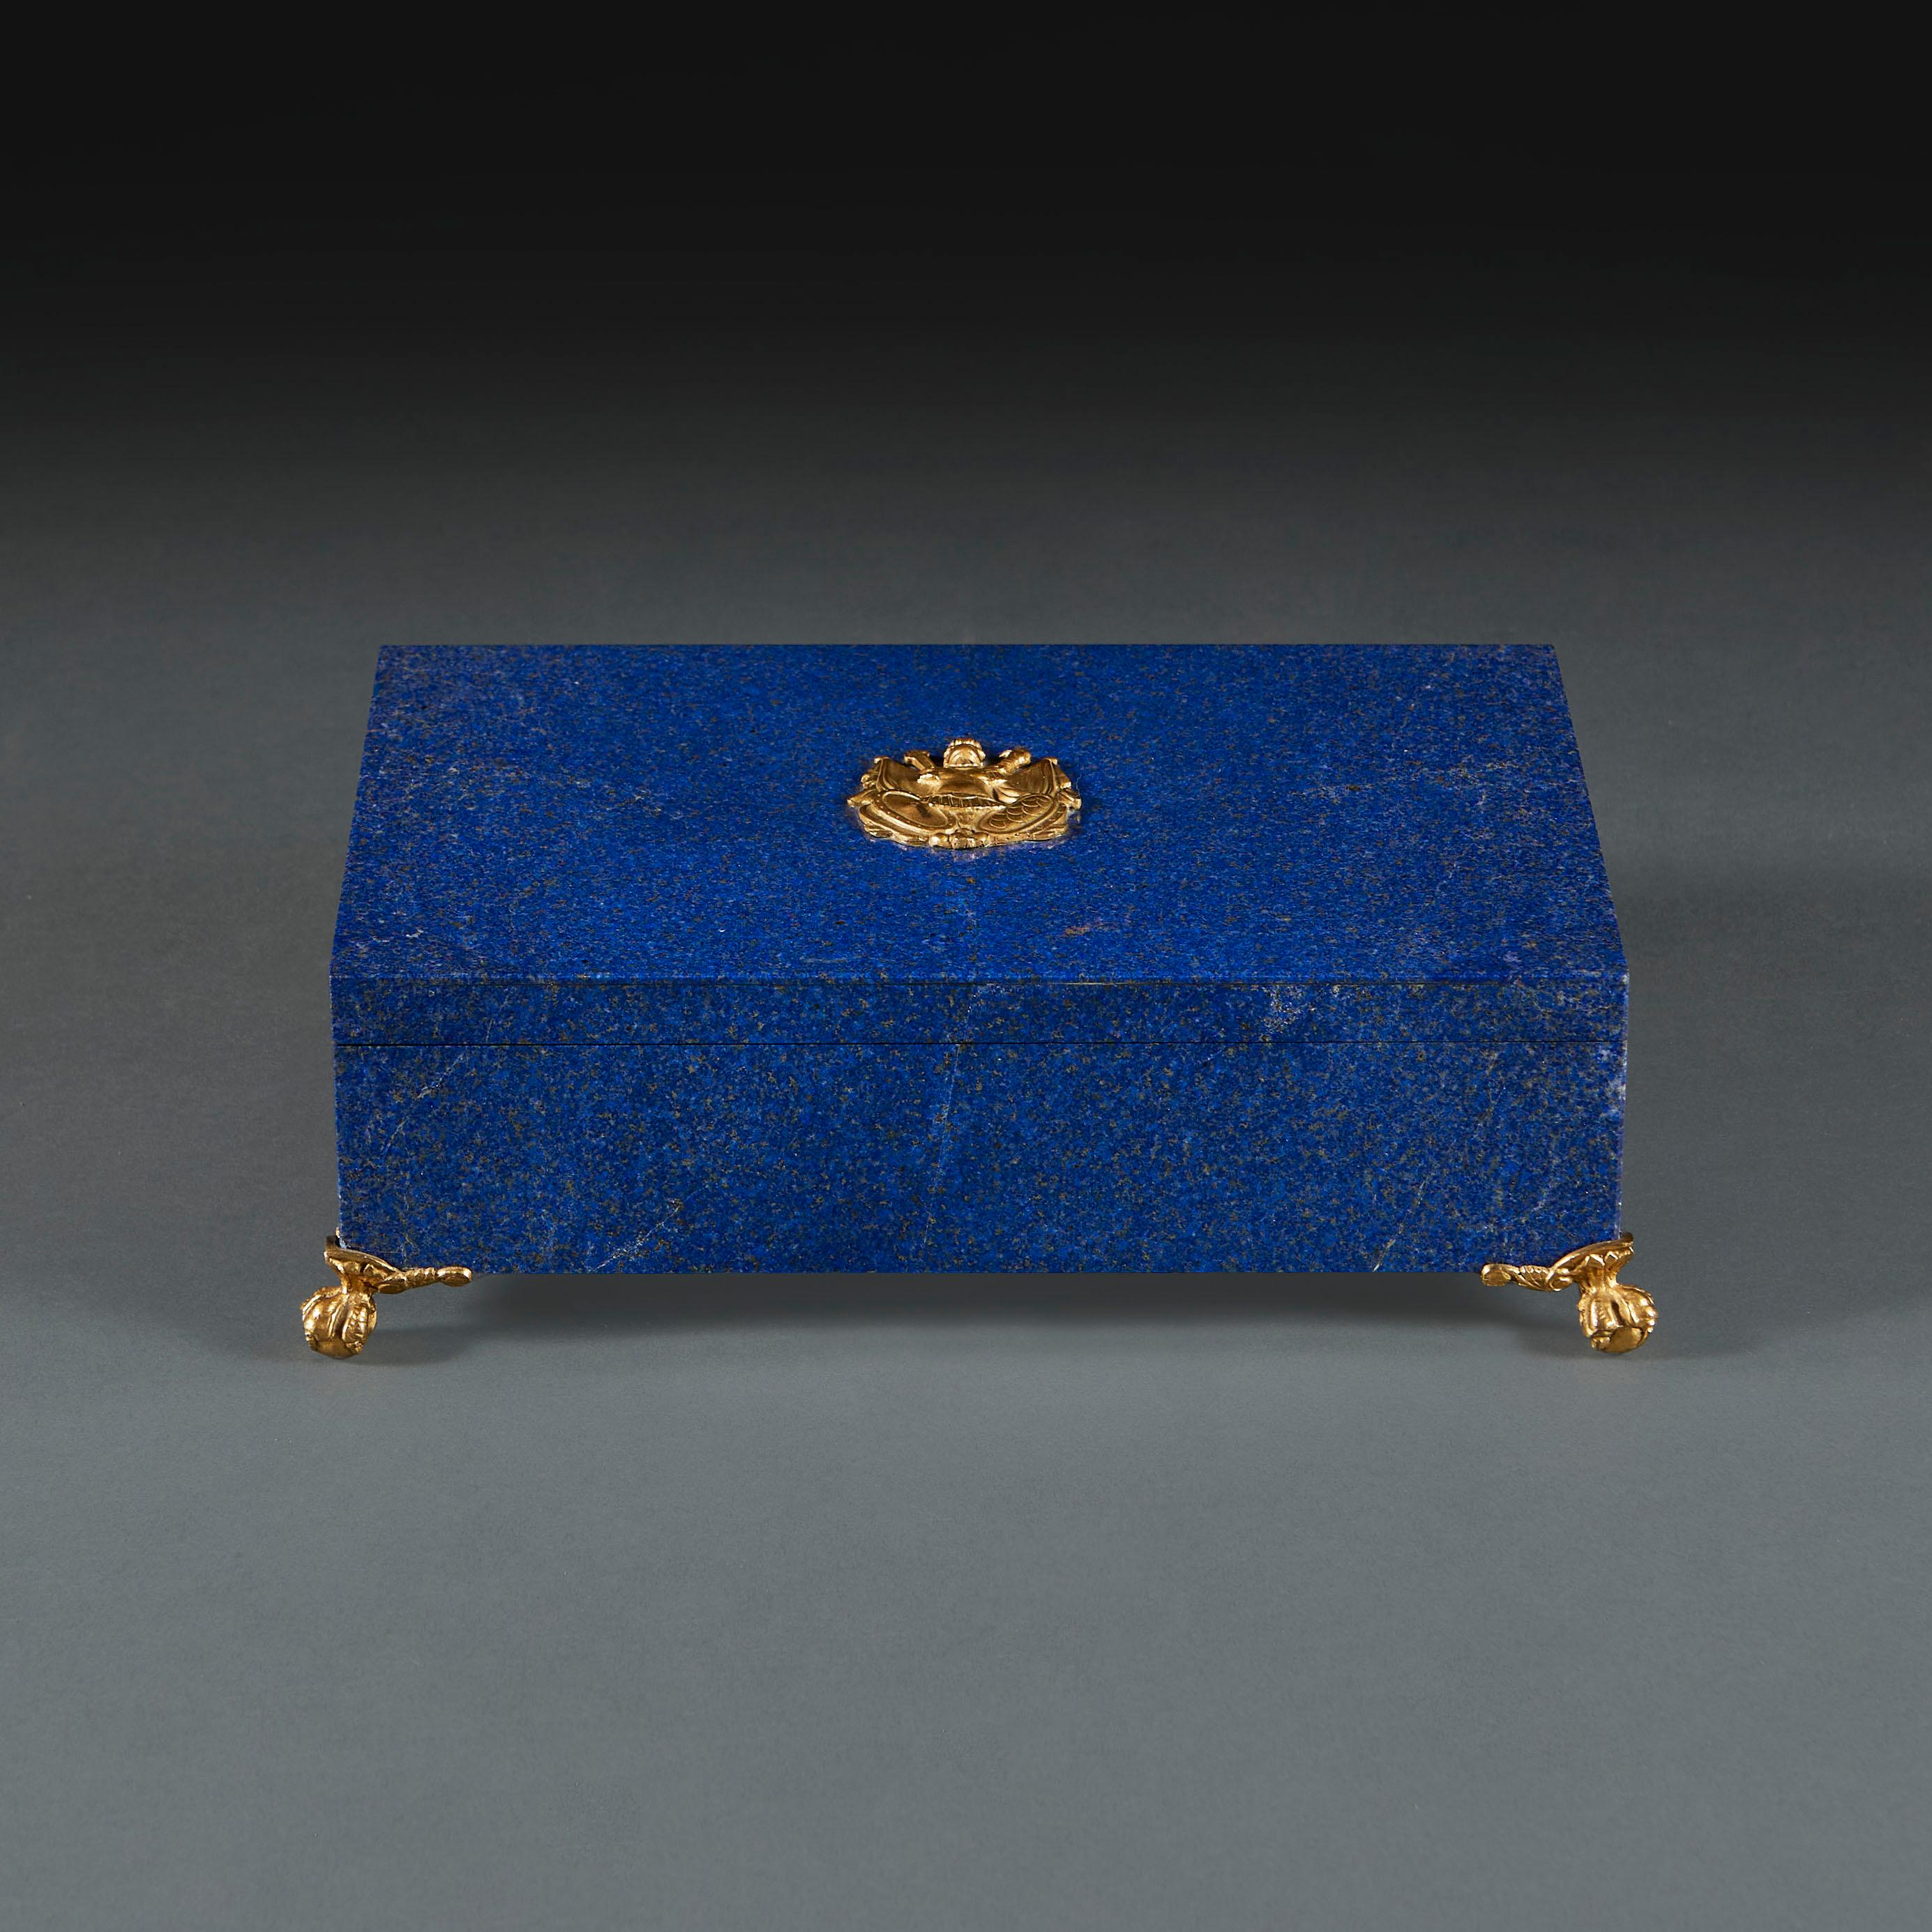 France, circa 1930

An fine early twentieth century Art Deco Lapis Lazuli casket with the interior lined in black slate, a Marshall trophy to the top and gilt bronze mounts, all supported on claw and ball feet. 

Height 10.00cm
Width 32.00cm
Depth